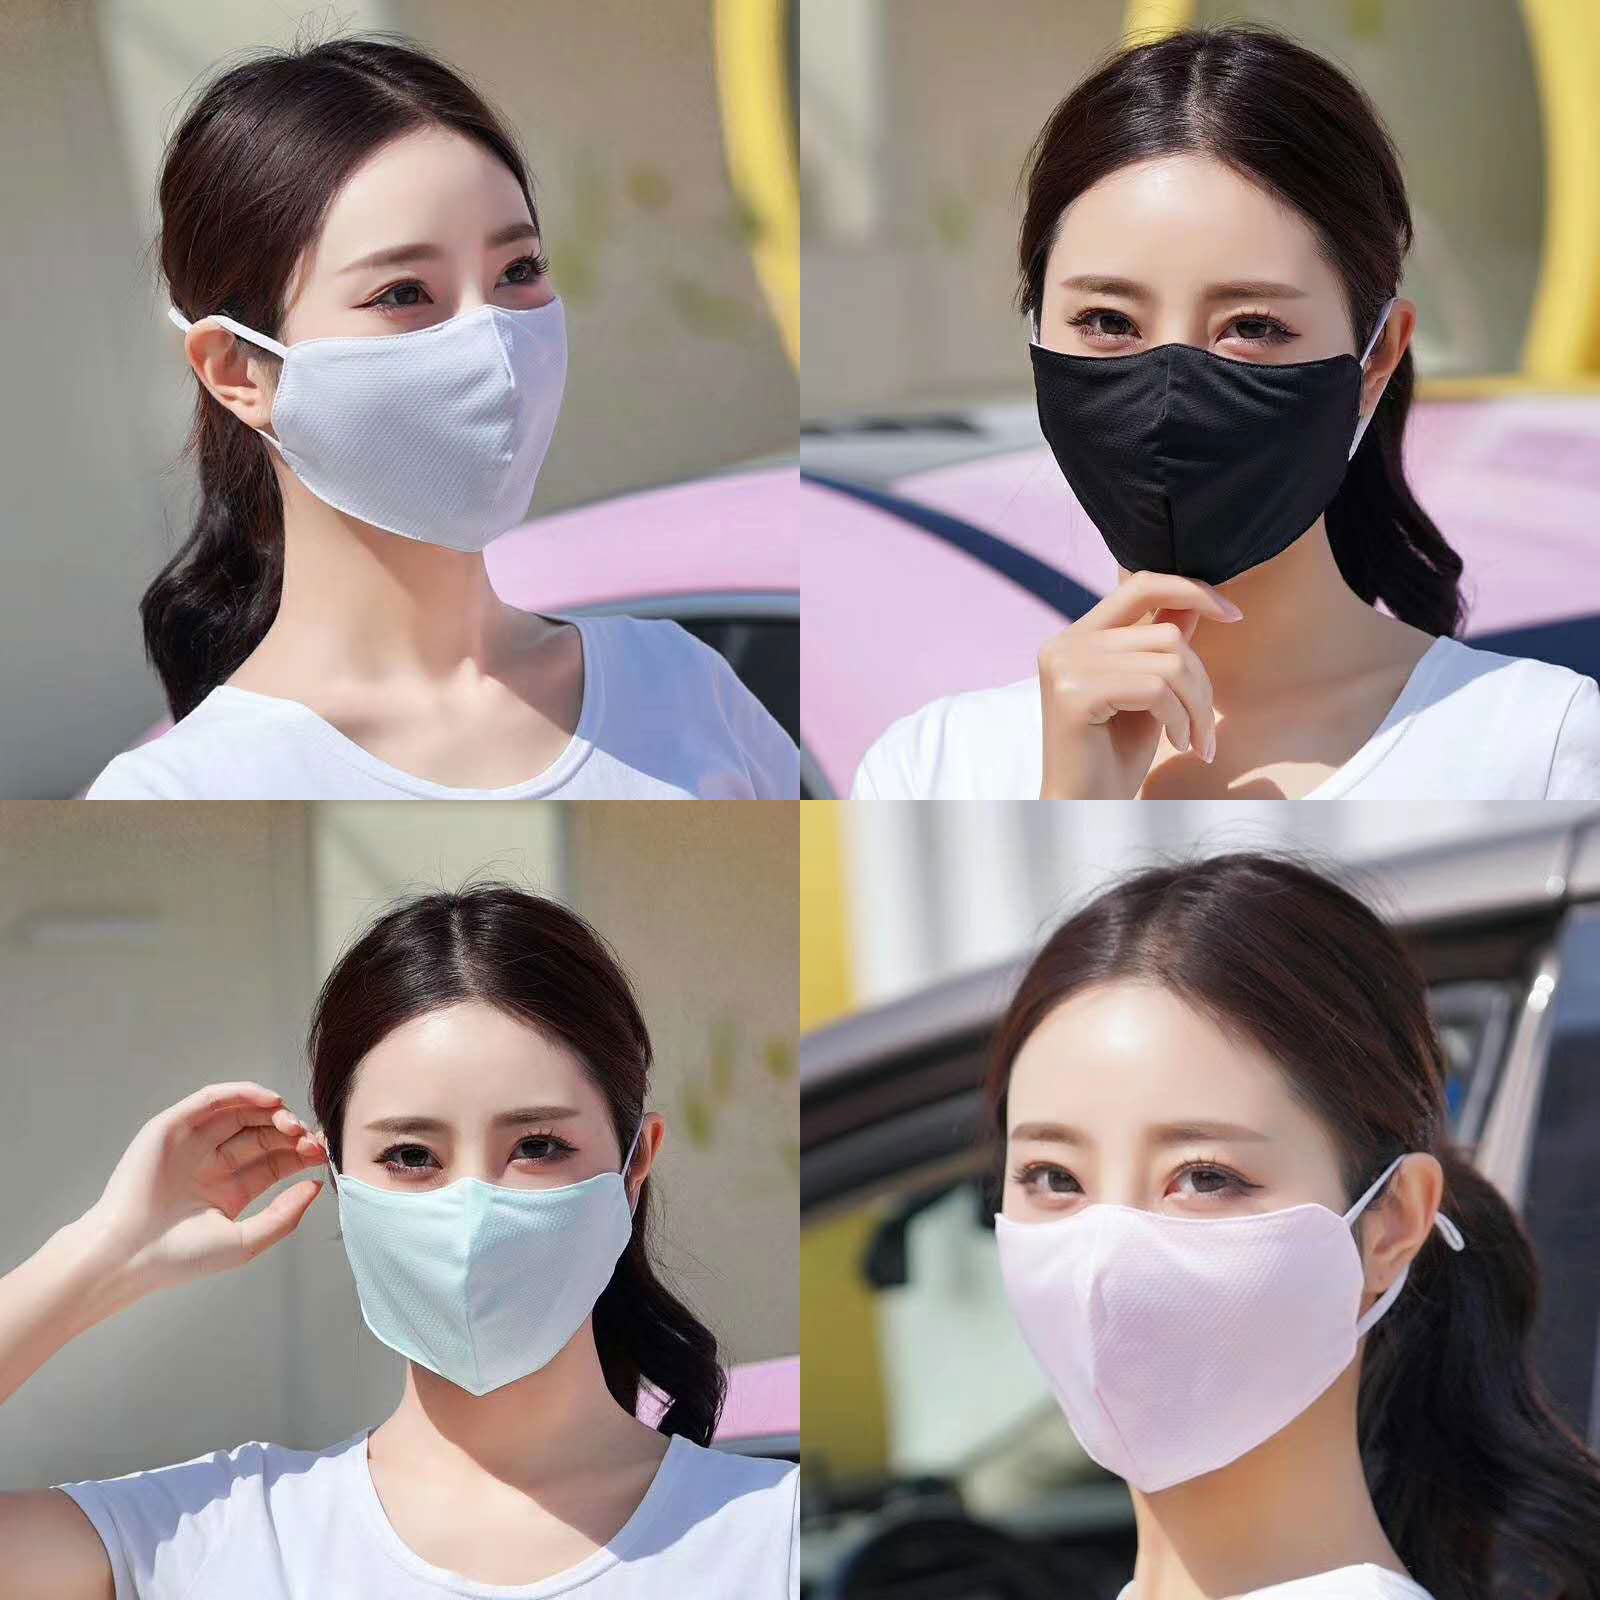 4 Pack of Cloth Face Mask Gray, Black, Blue, and Pink